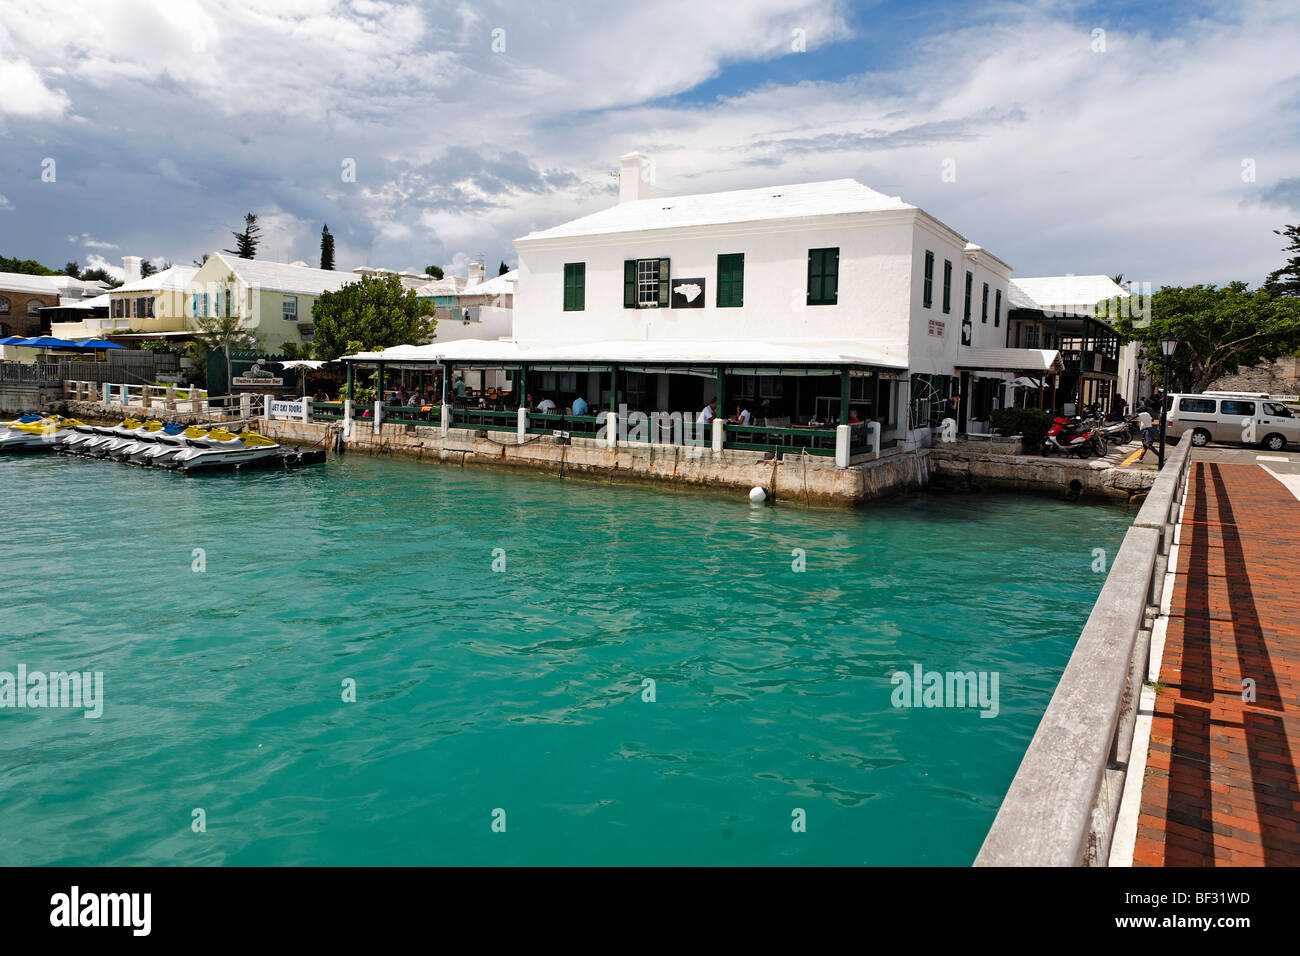 Bay side View of the White Horse  Restaurant and Pub, St George, Bermuda Stock Photo